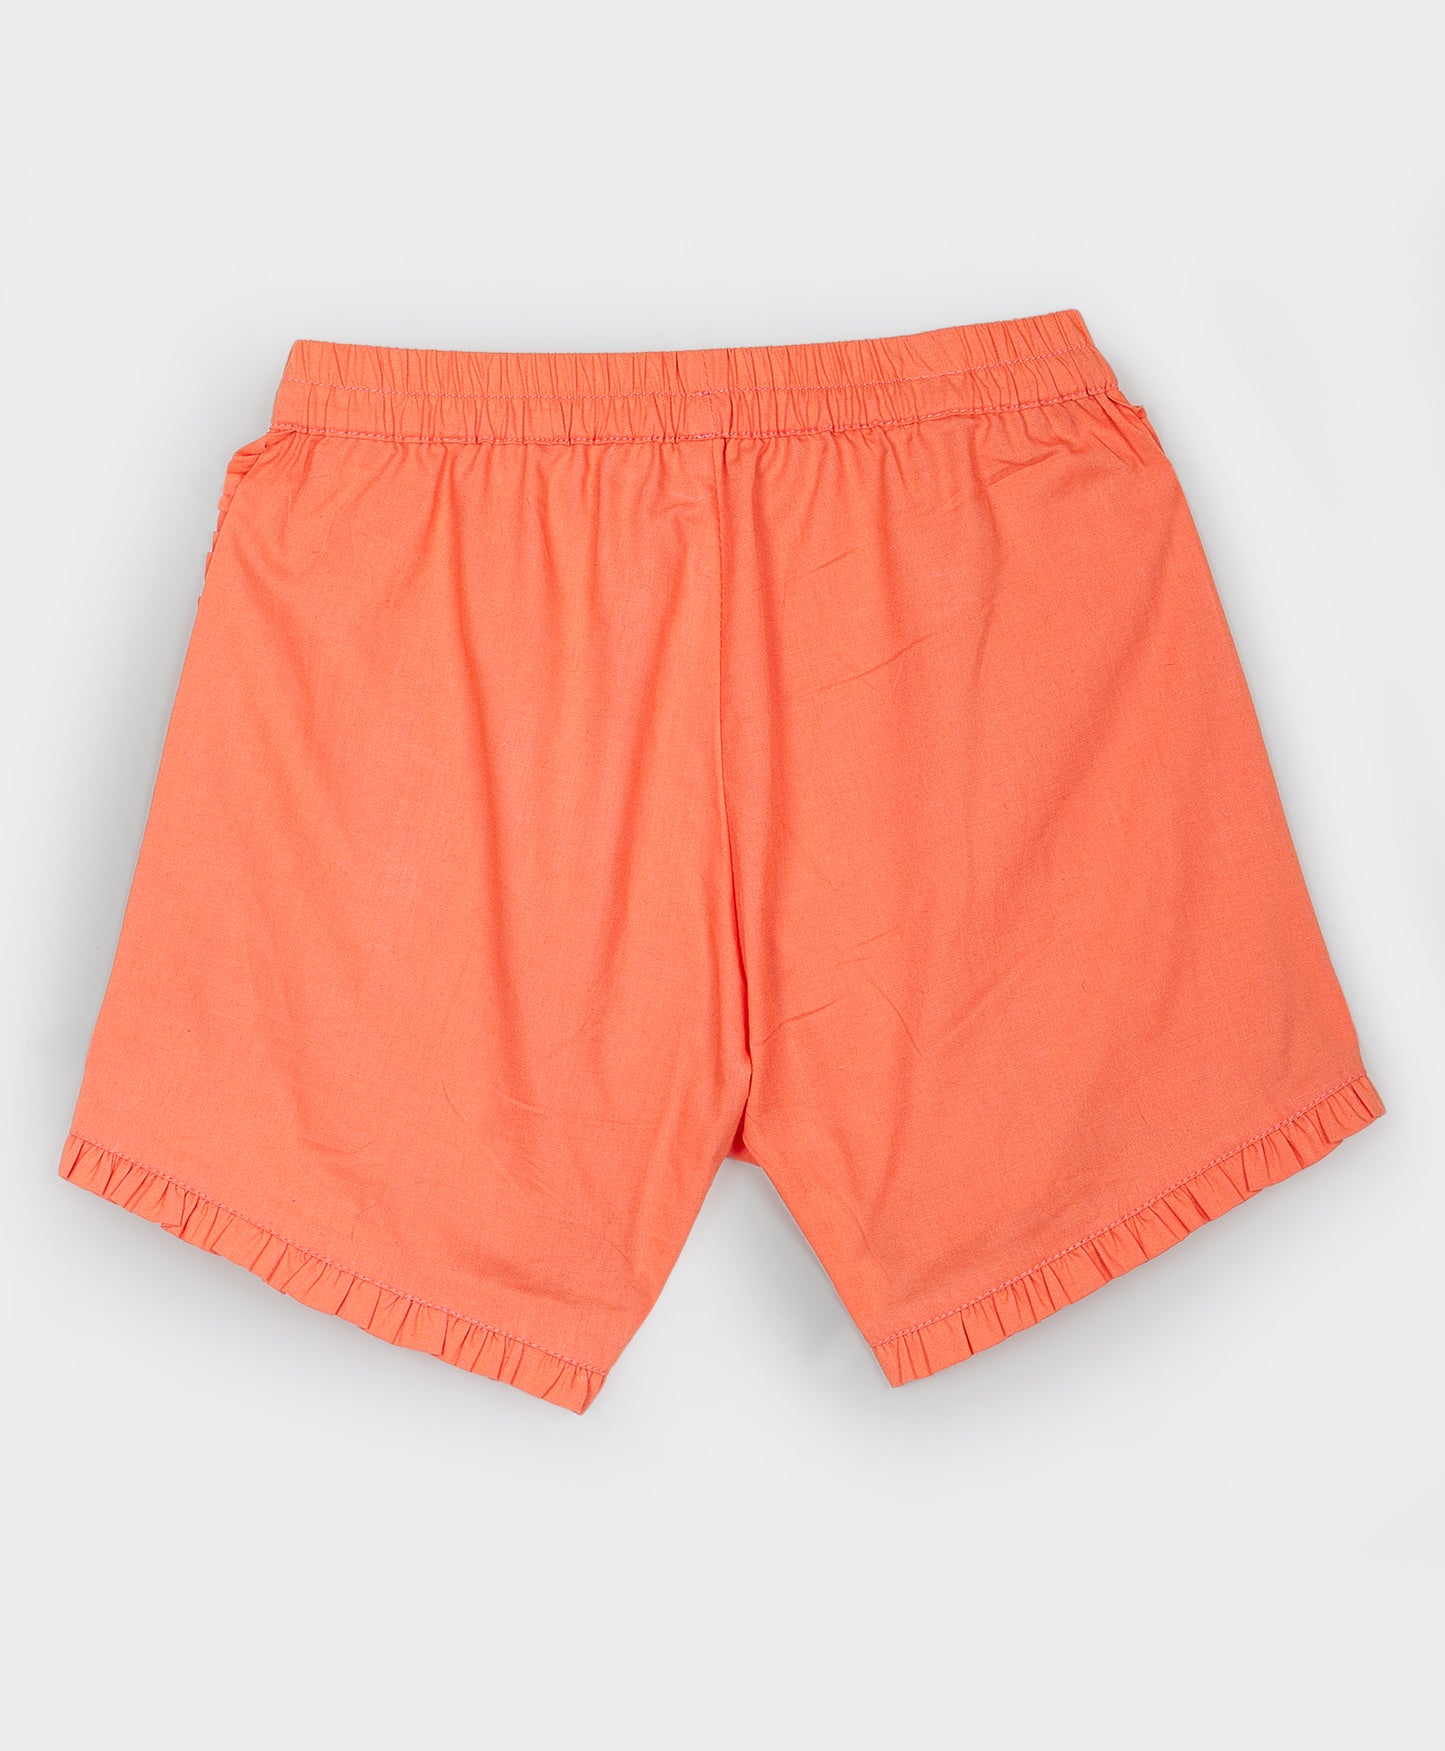 Orange shorts with frill detailing on the seams and bottom